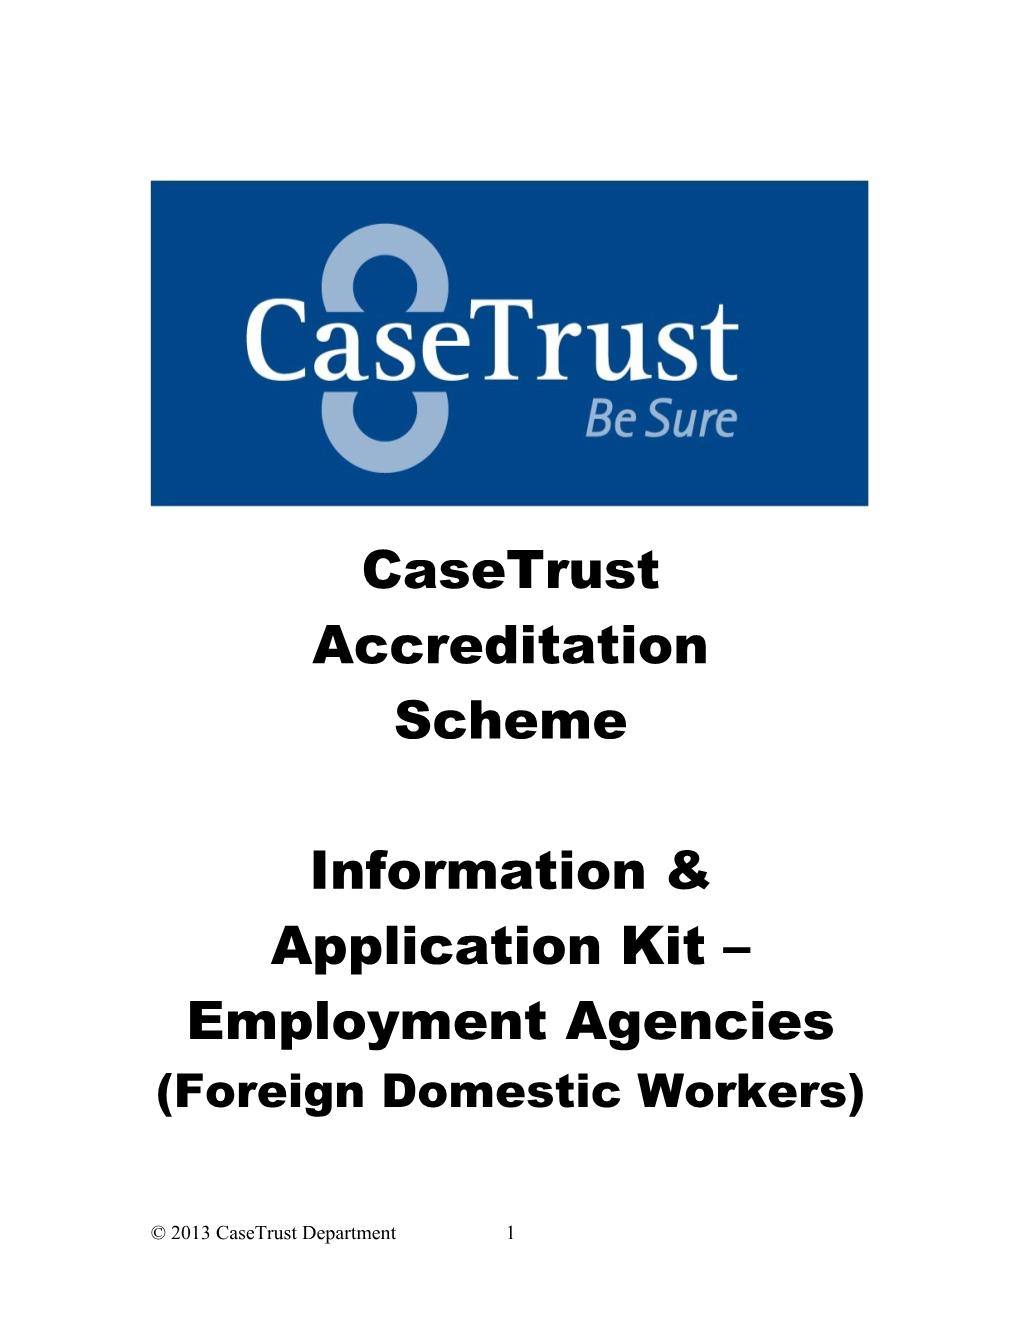 Information & Application Kit Employment Agencies (Foreign Domestic Workers)